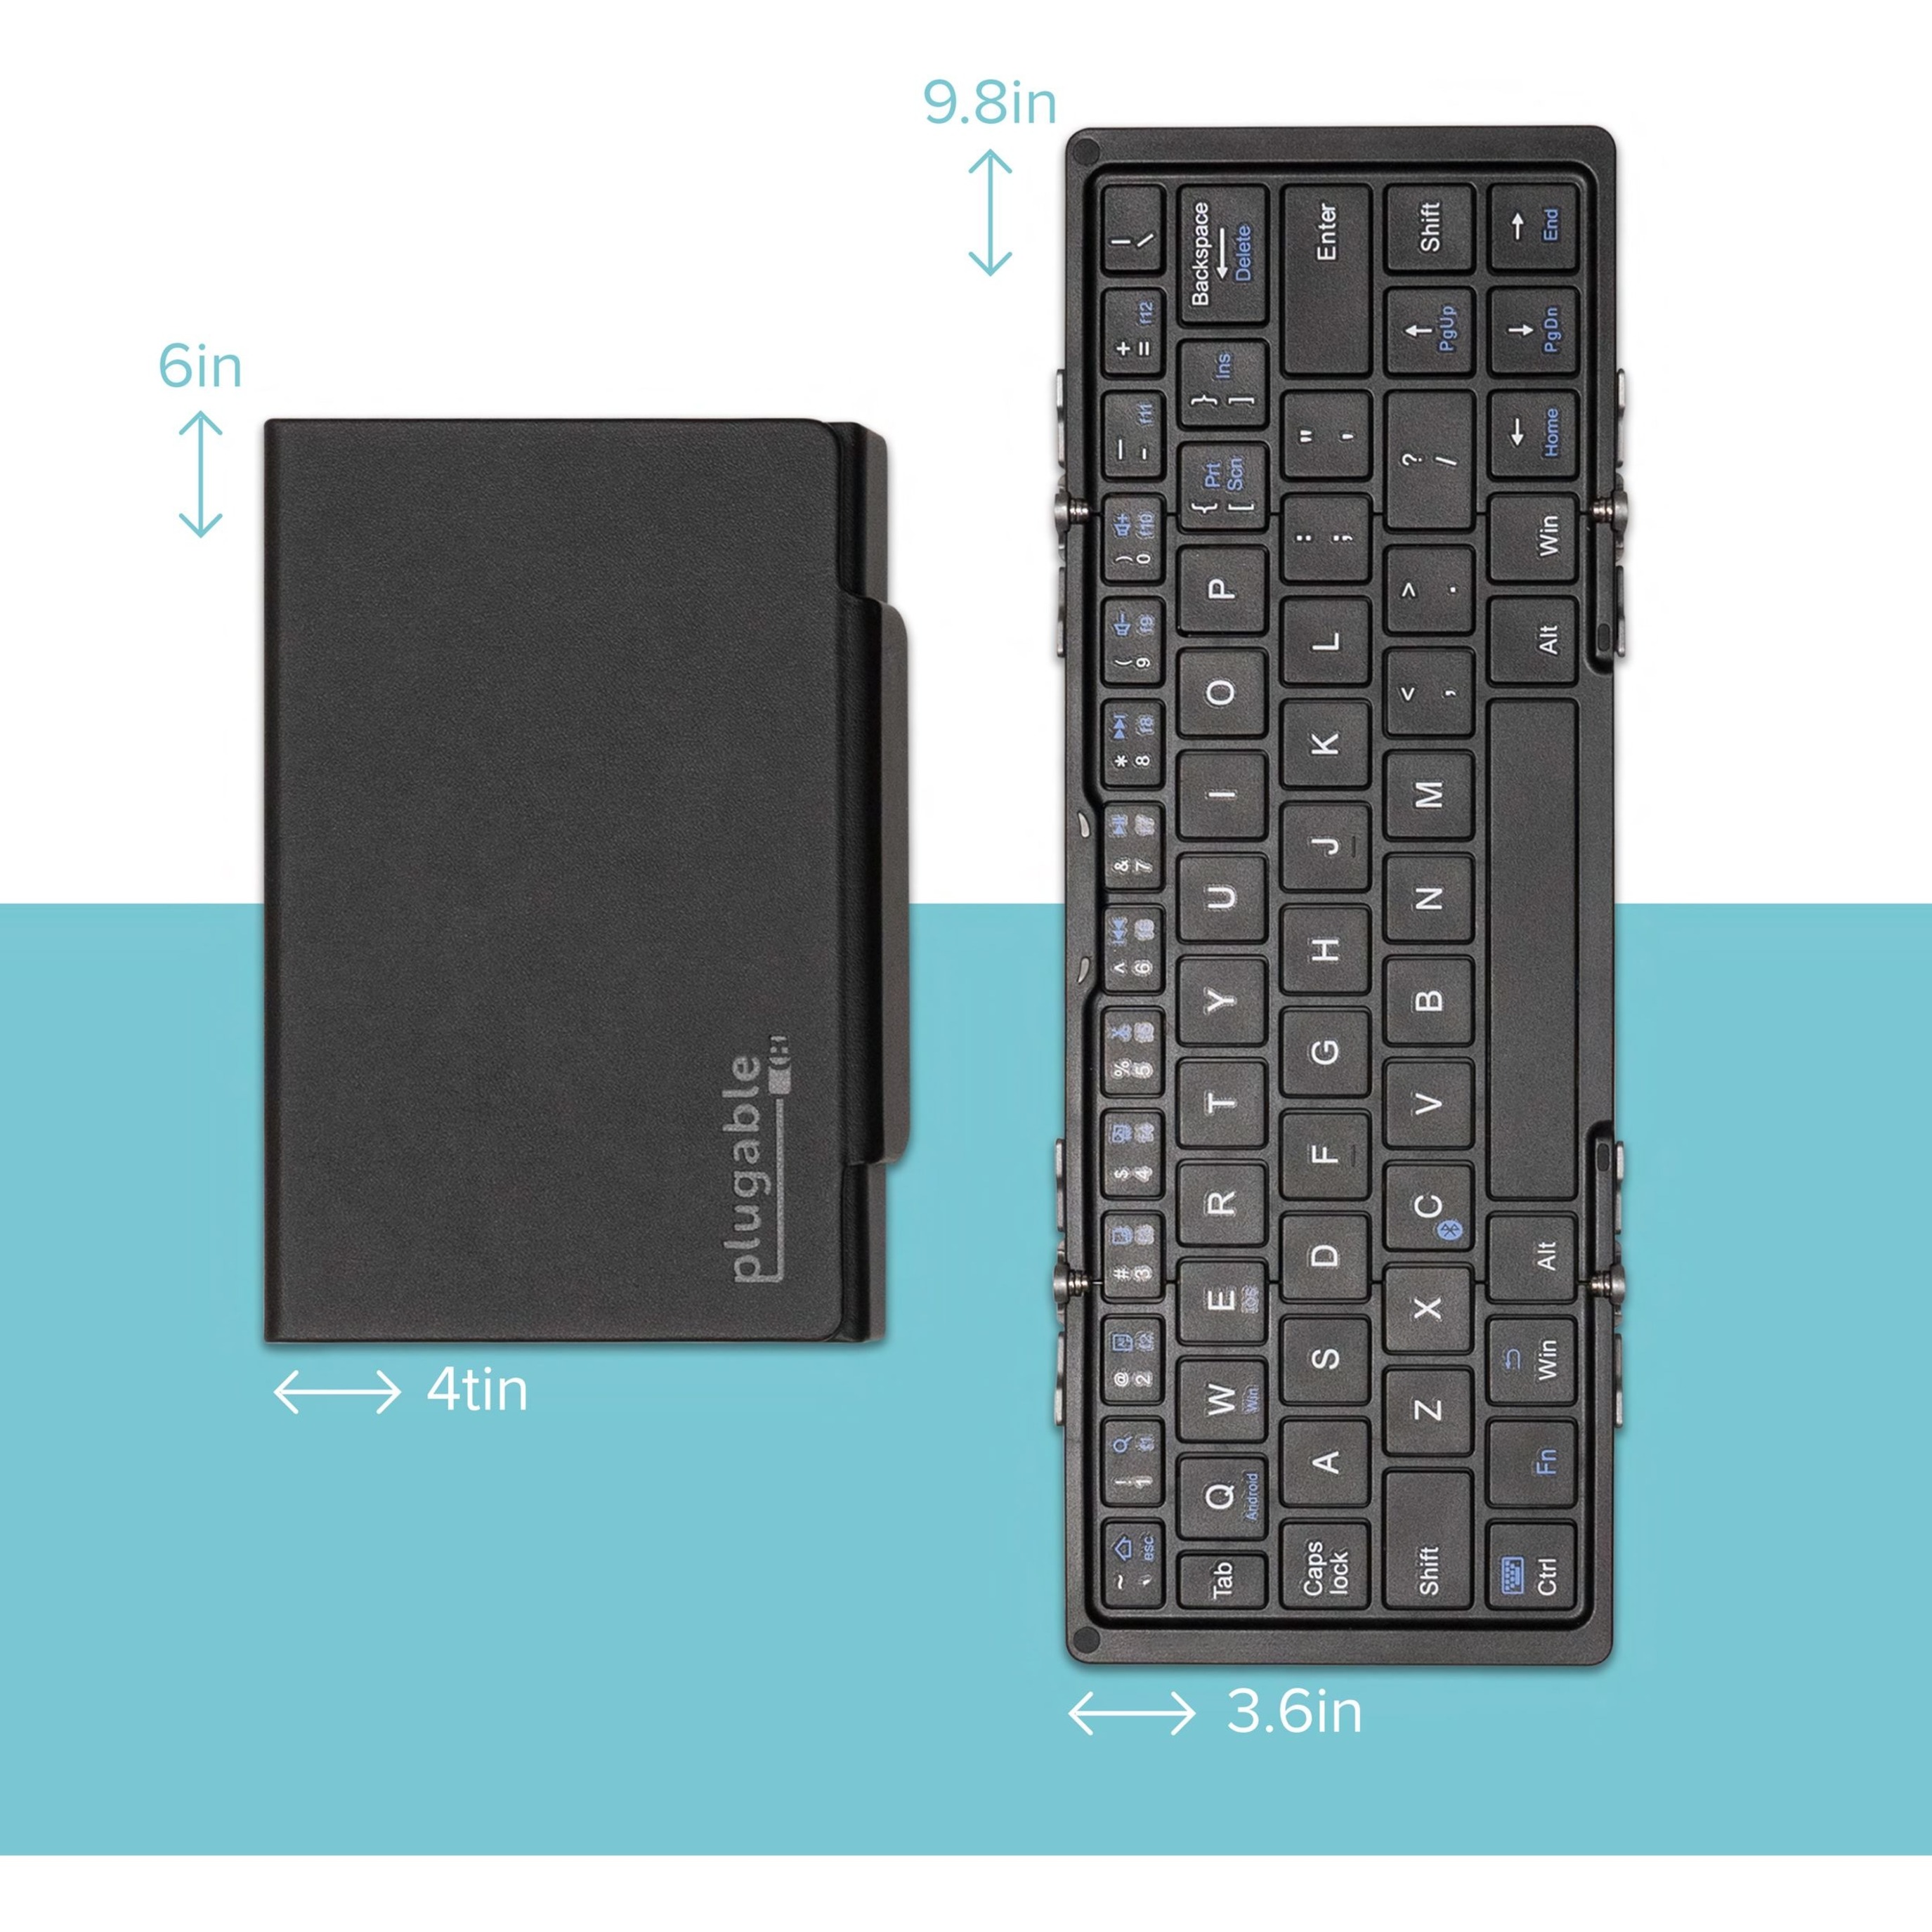 Plugable Foldable Bluetooth Keyboard Compatible with iPad, iPhones, Android, and Windows, Compact Multi-Device Keyboard, Wireless and Portable with Included Stand for iPad/iPhone (10 inches) - image 4 of 9